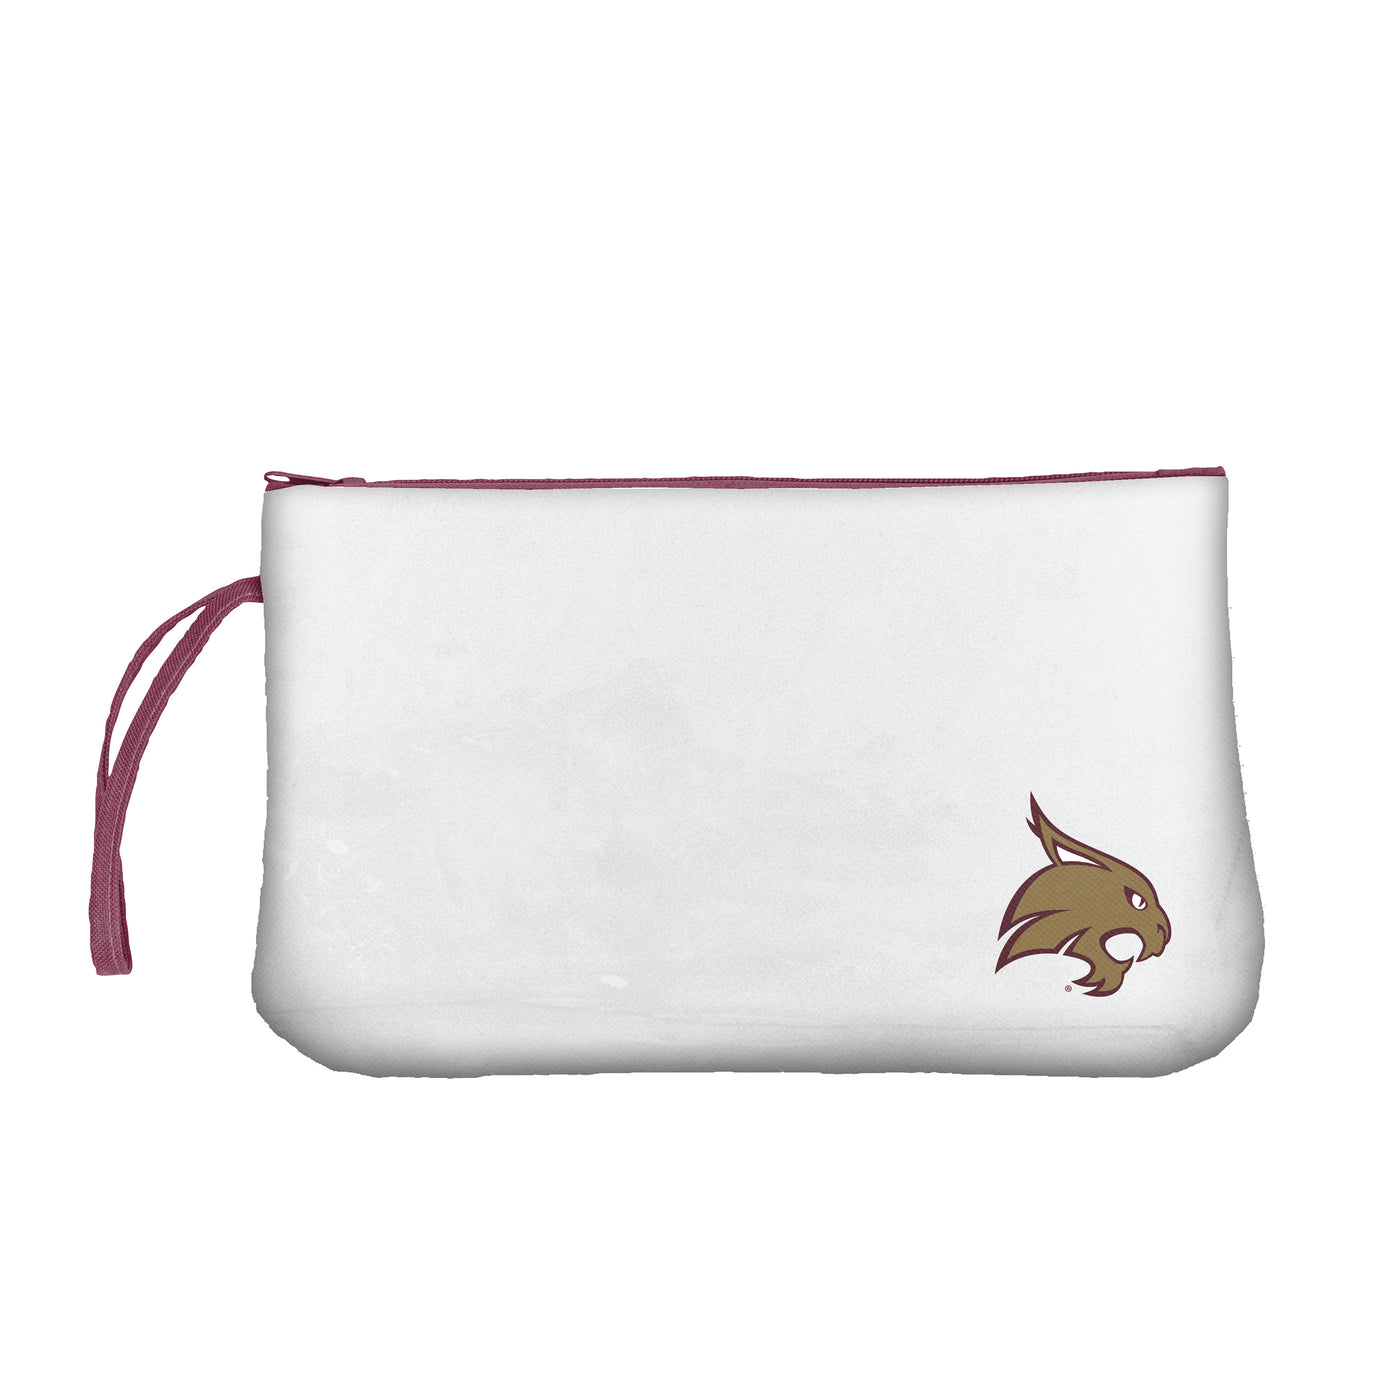 TX State Clear Wristlet